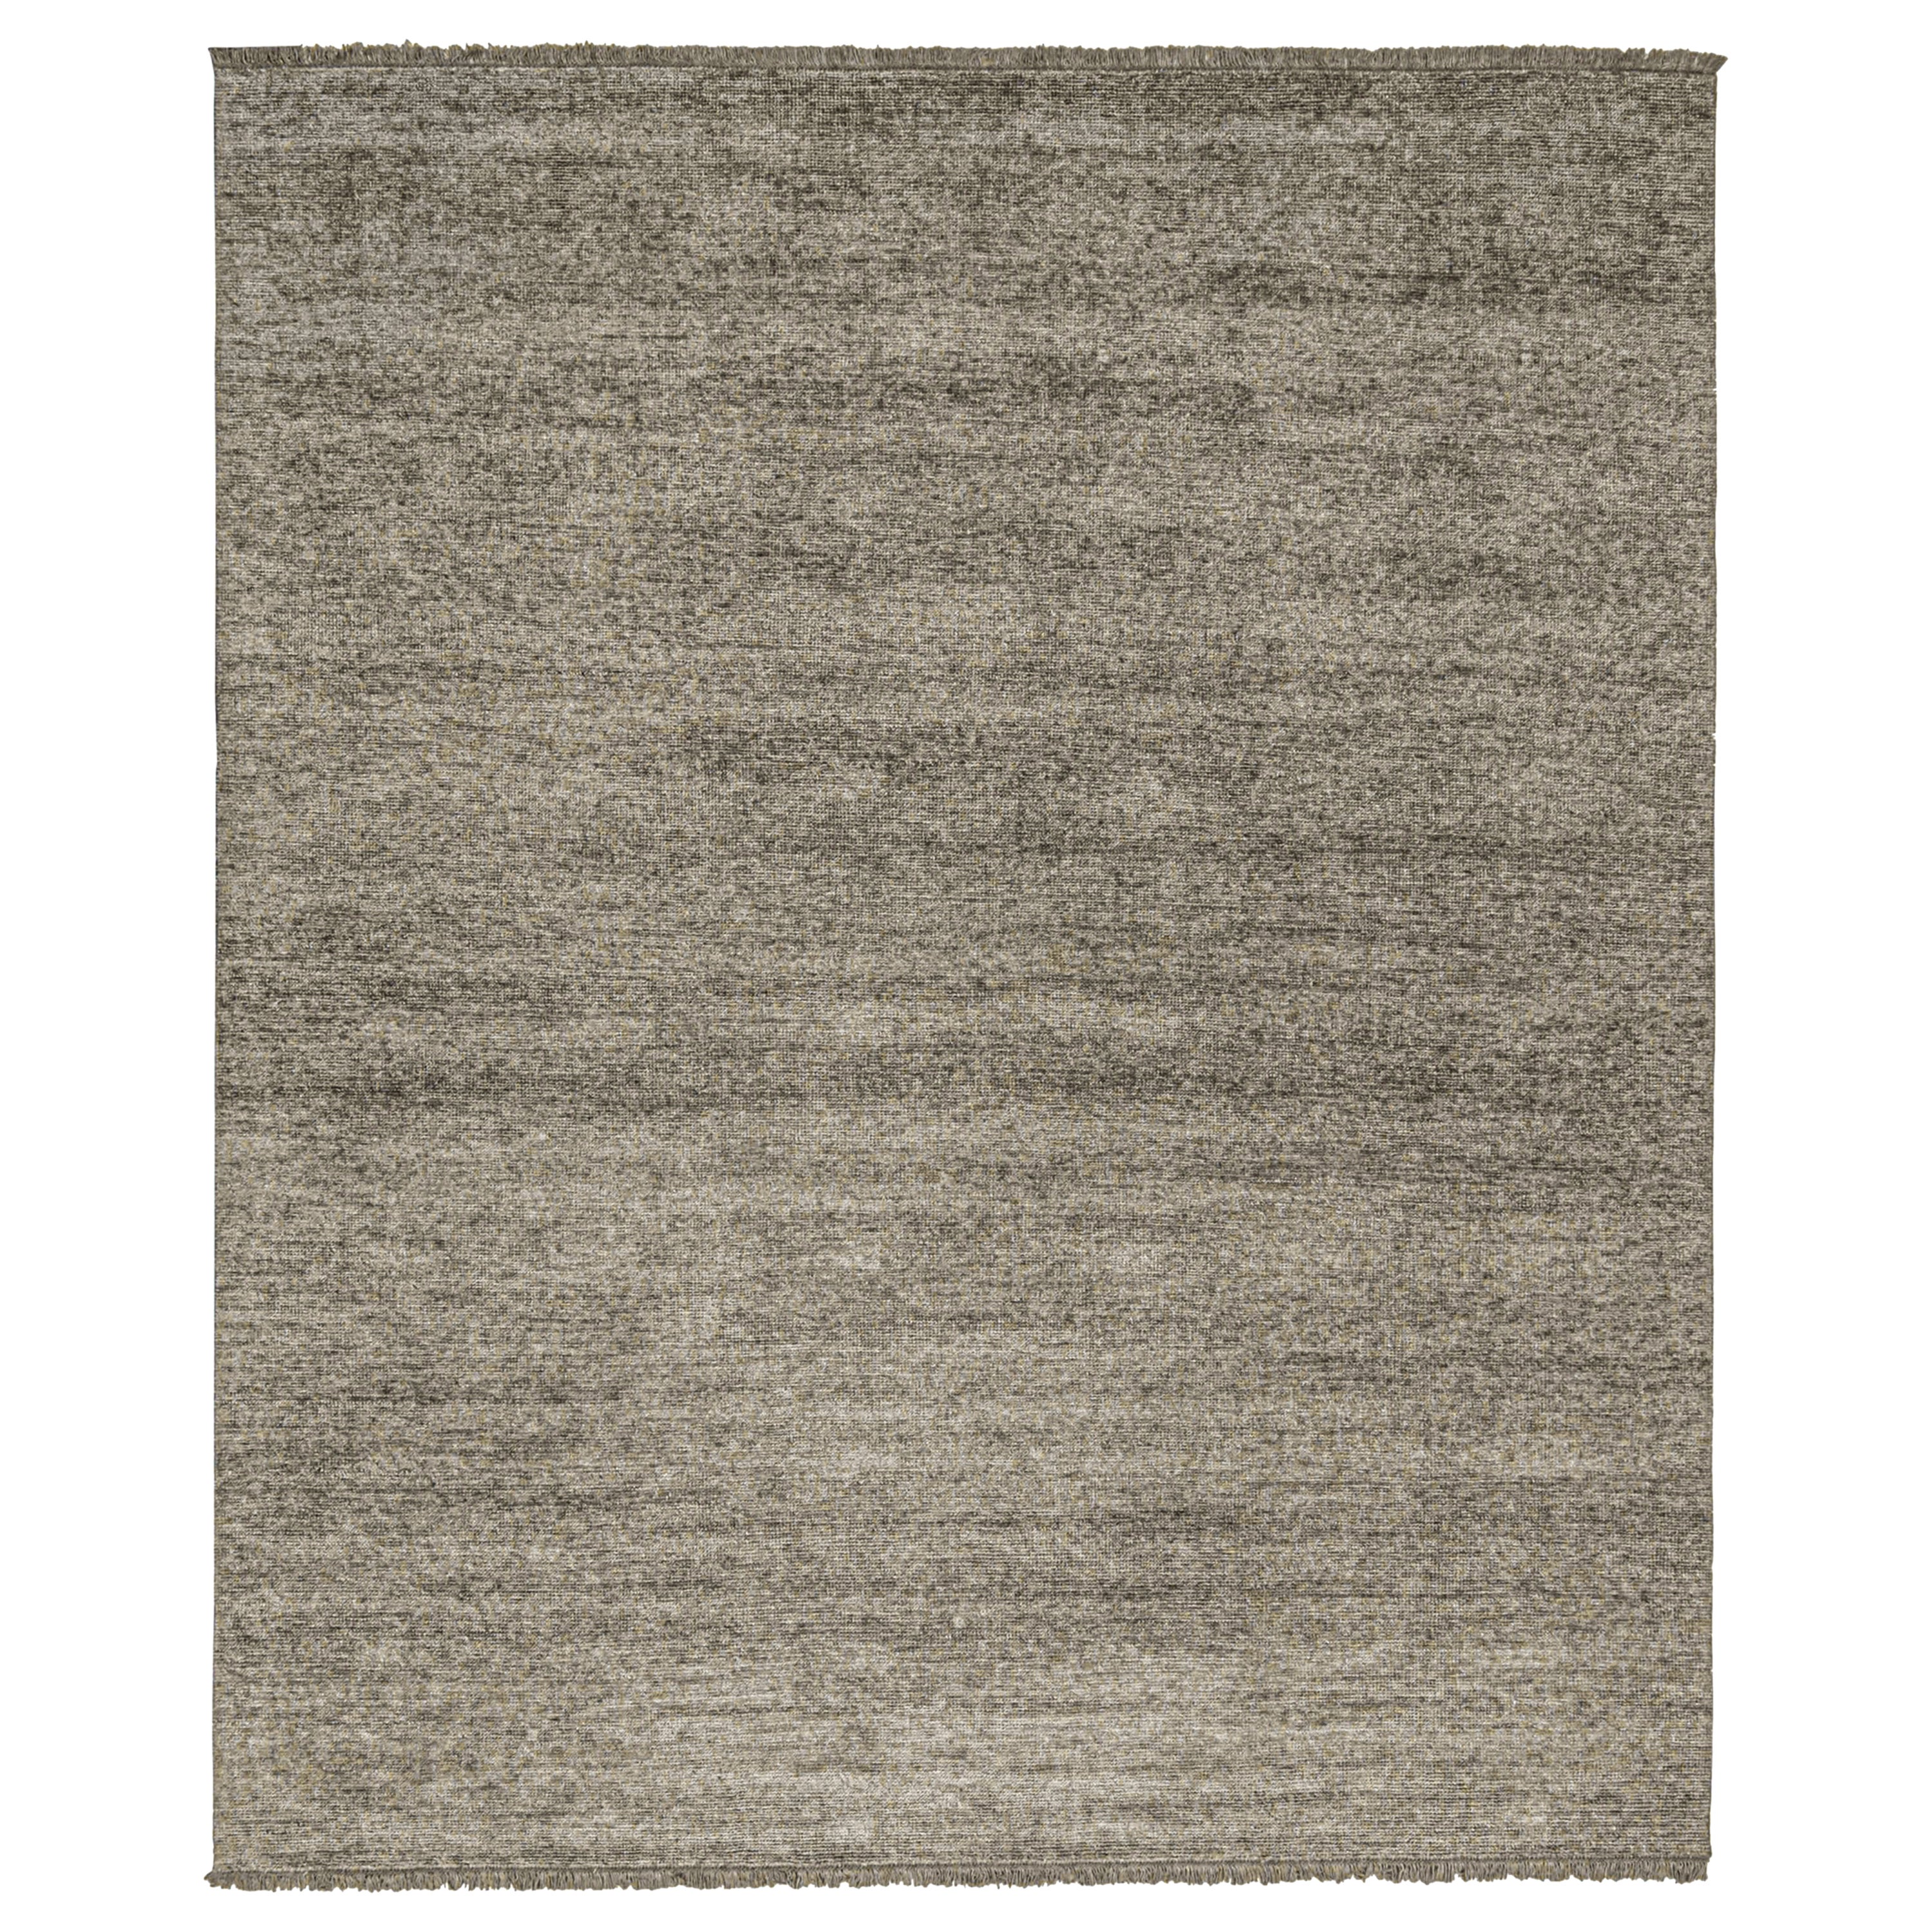 This 12x15 rug is a grand new entry to Rug & Kilim’s Modern rug collection. 

Connoisseurs will note this piece is from our new Light on Loom line, which includes quicker custom capabilities than ever before. This piece and others like it can also